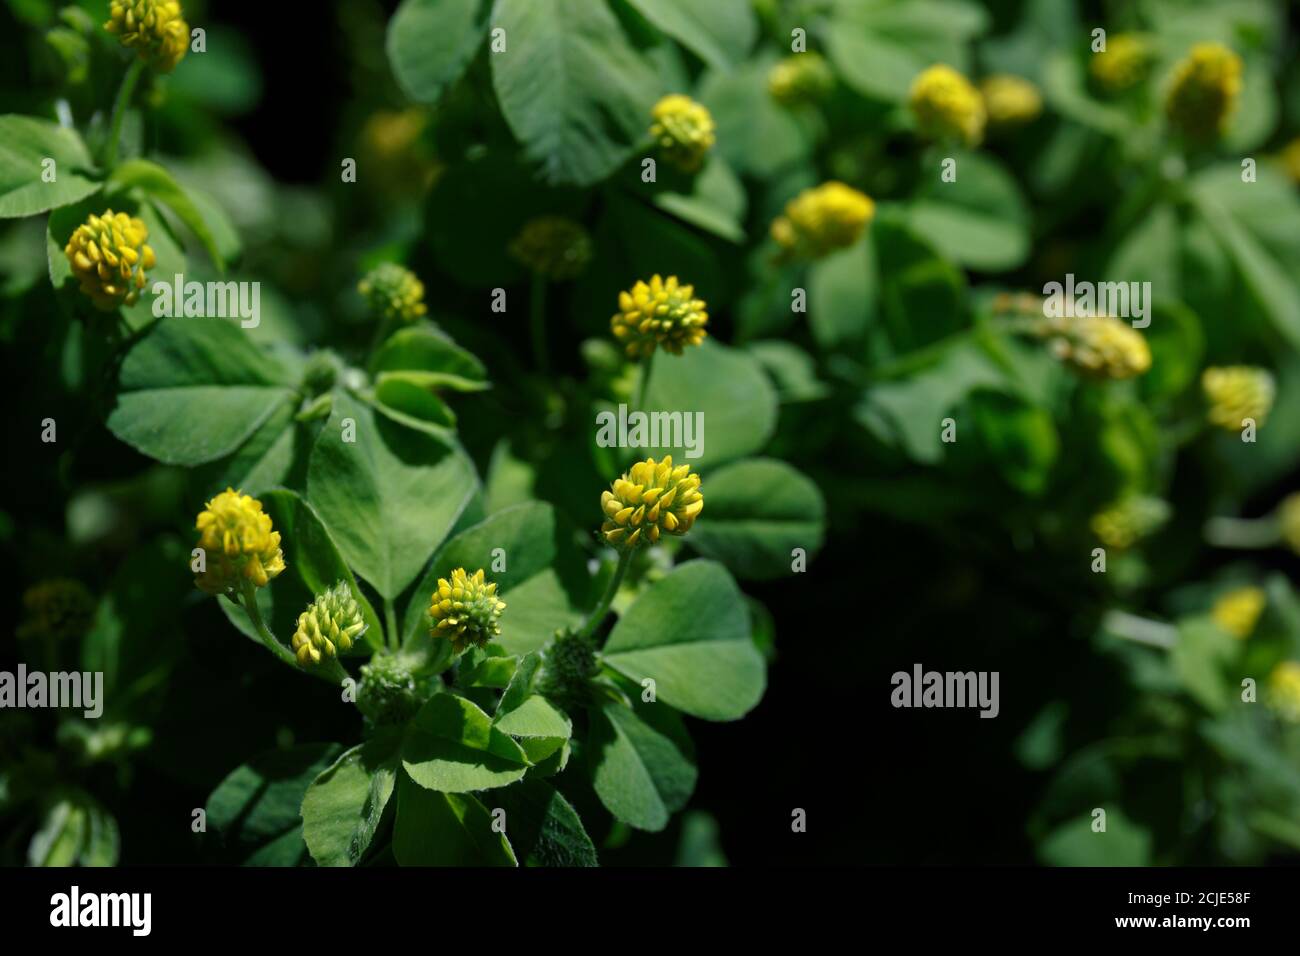 Yellow Medicago flowers with green leaves on a black background close up Stock Photo